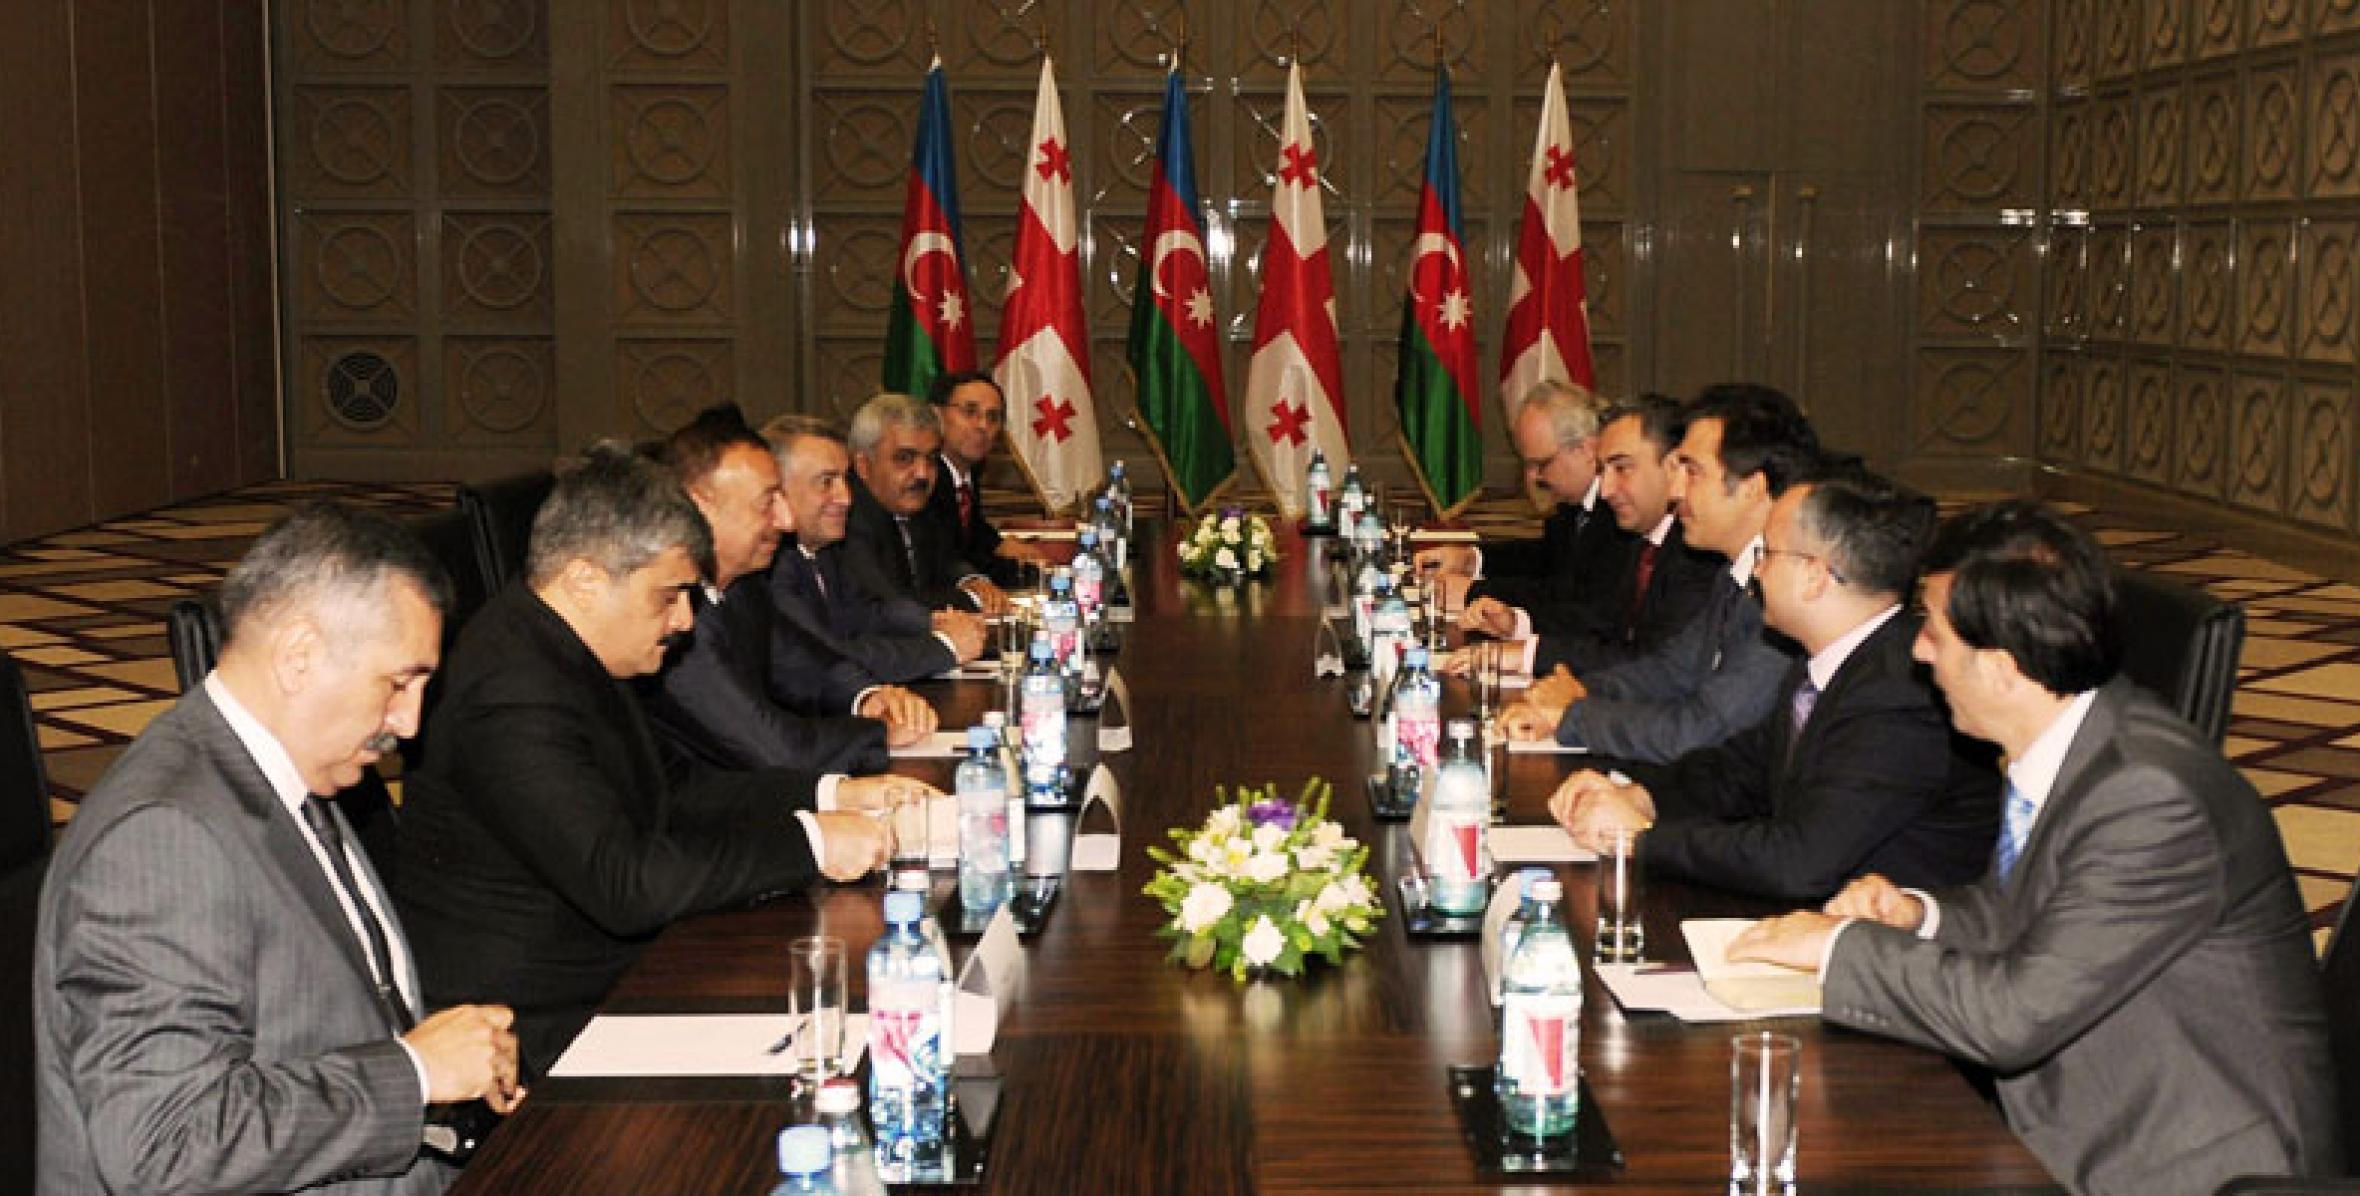 Presidents of Azerbaijan and Georgia held a meeting in presence of delegations